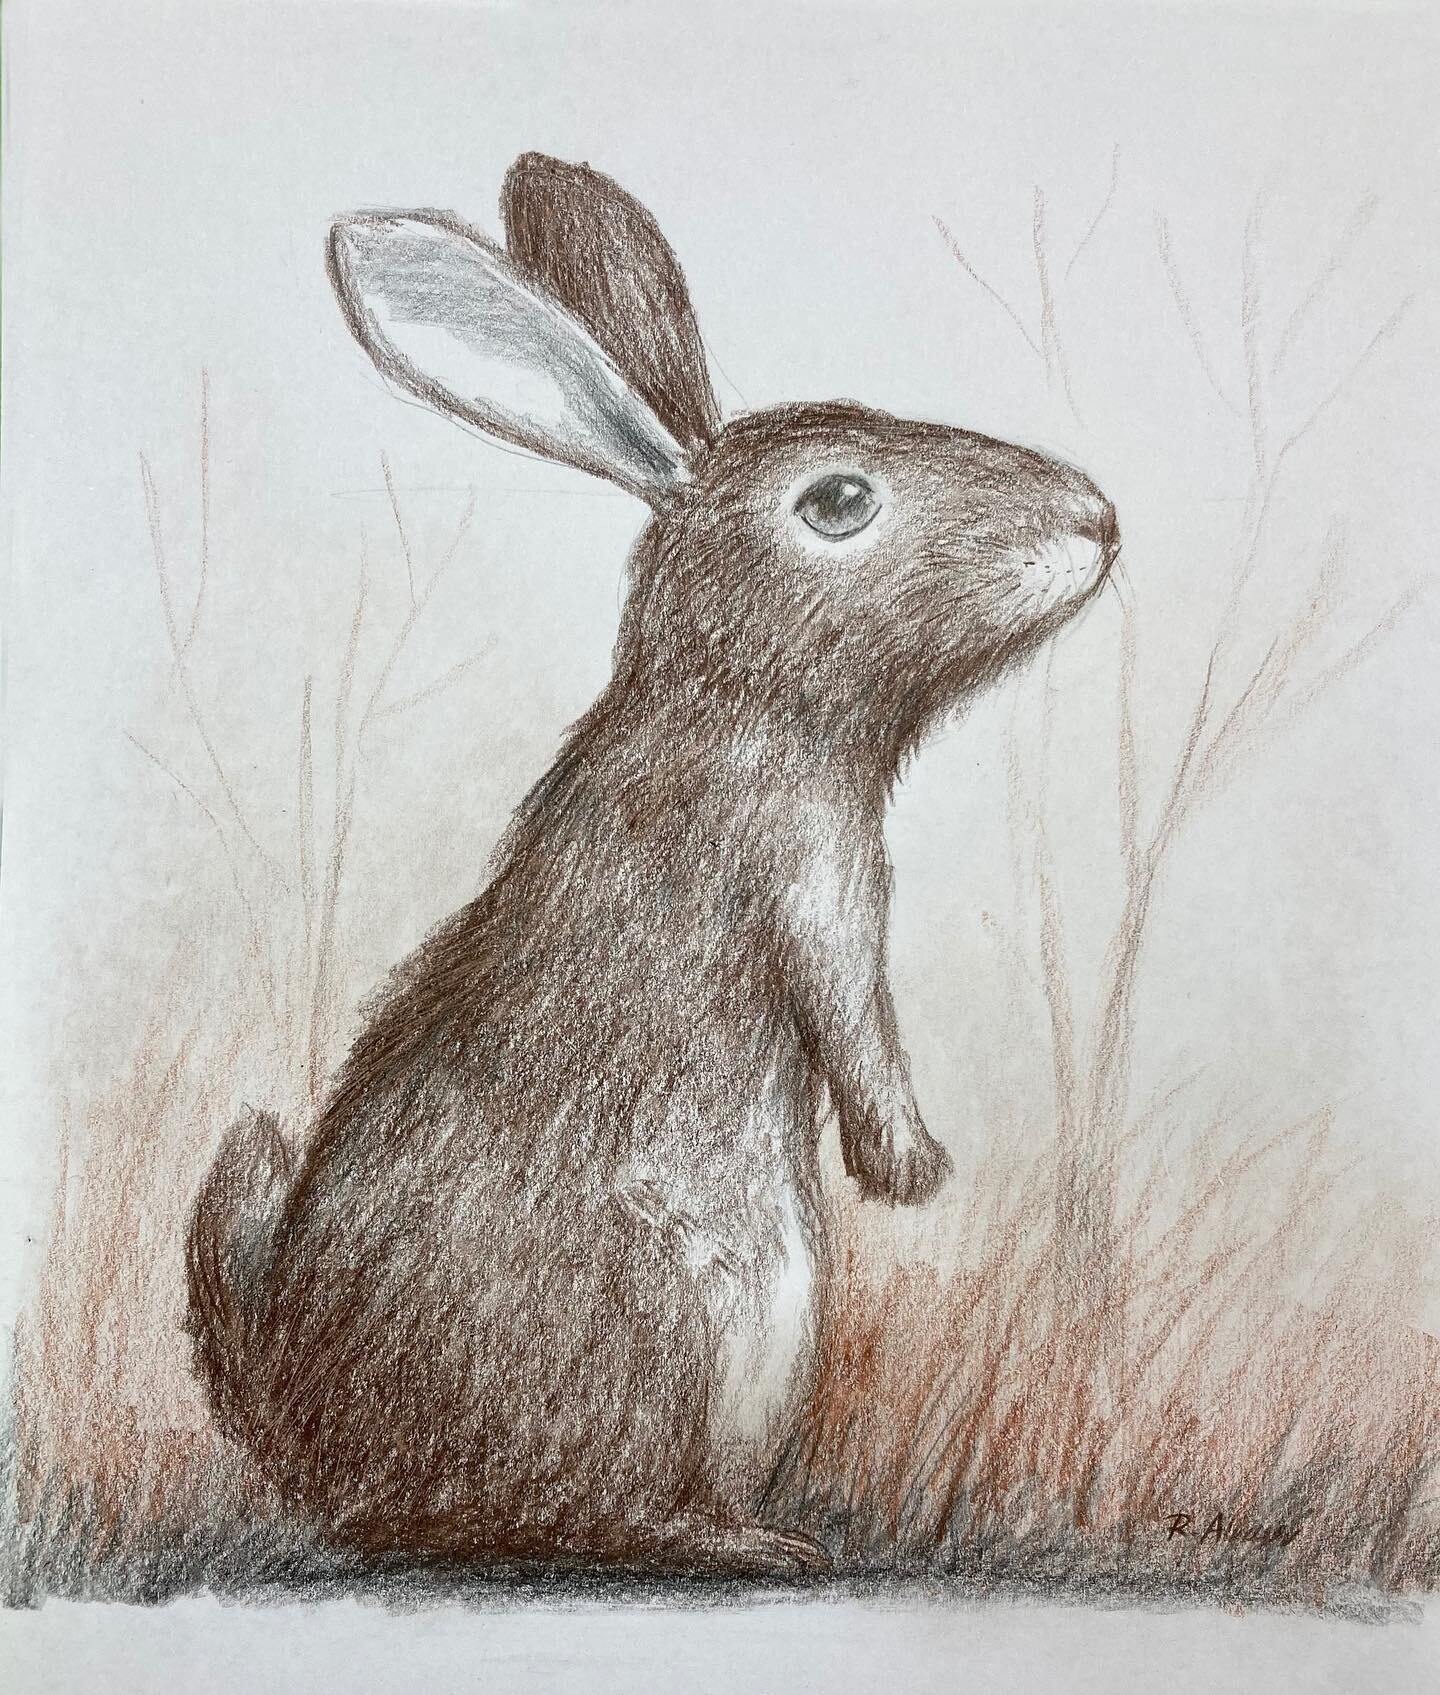 This is the colored pencil artwork rabbit showed to our colored pencil students! Message us if you are interested in taking colored pencil class with us!! 😀😀😀😀
#charlotteartstudio  #parents #art #fineart #creativity #arteducation #elementaryart #